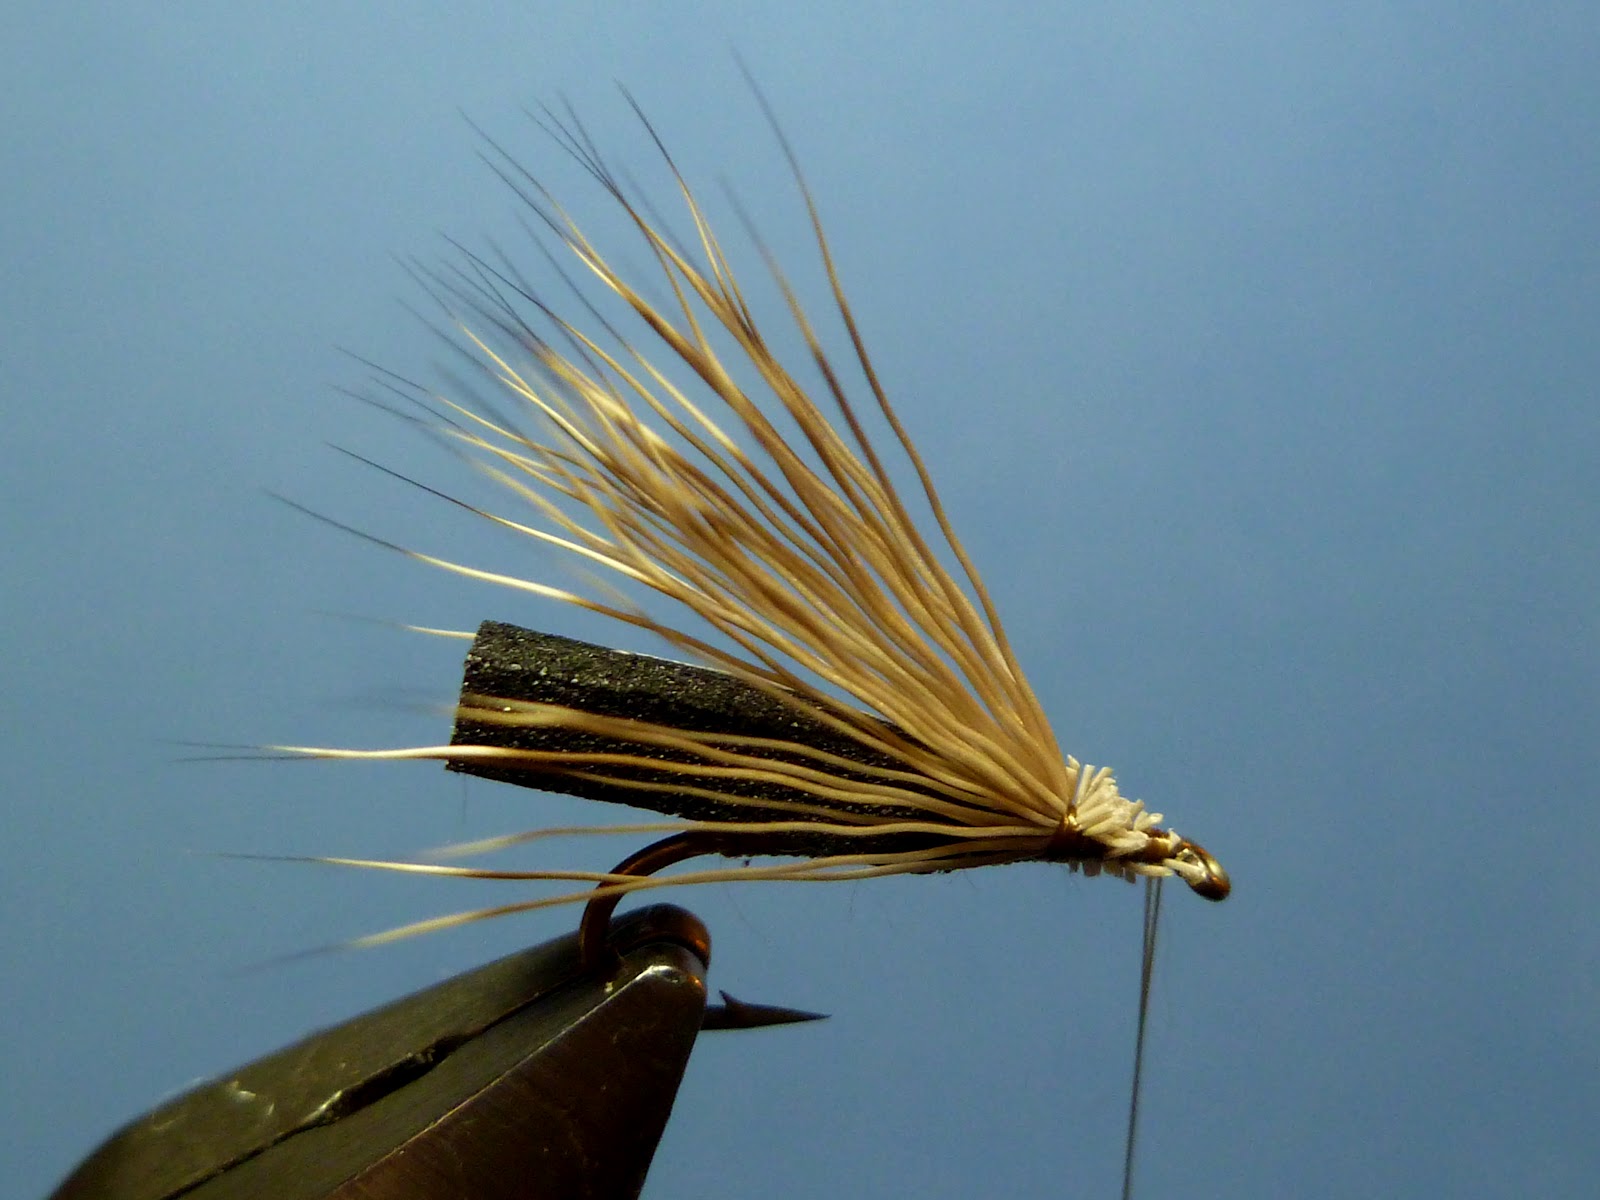 55 on the fly: tying the Neversink a step-by-step